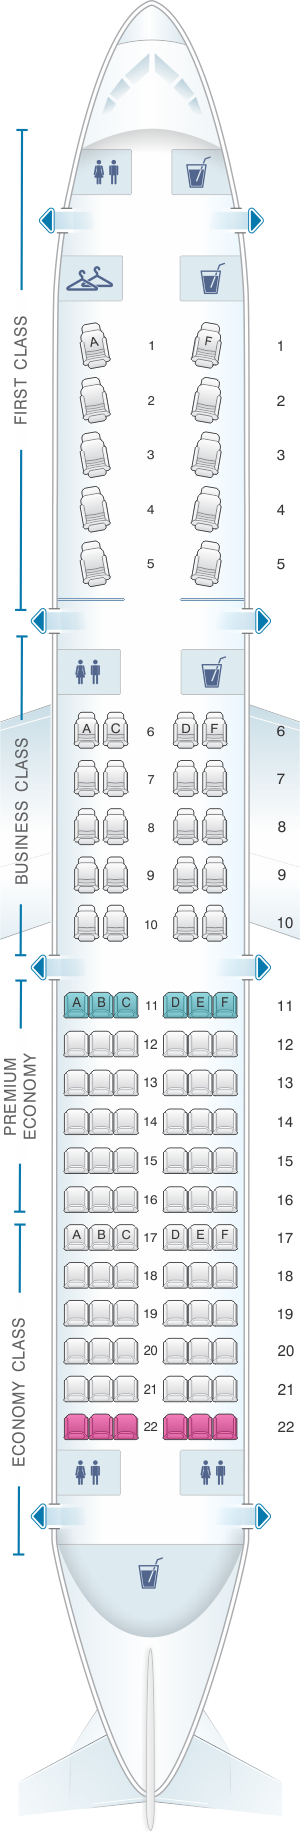 How can you access the Airbus A321 seating chart?